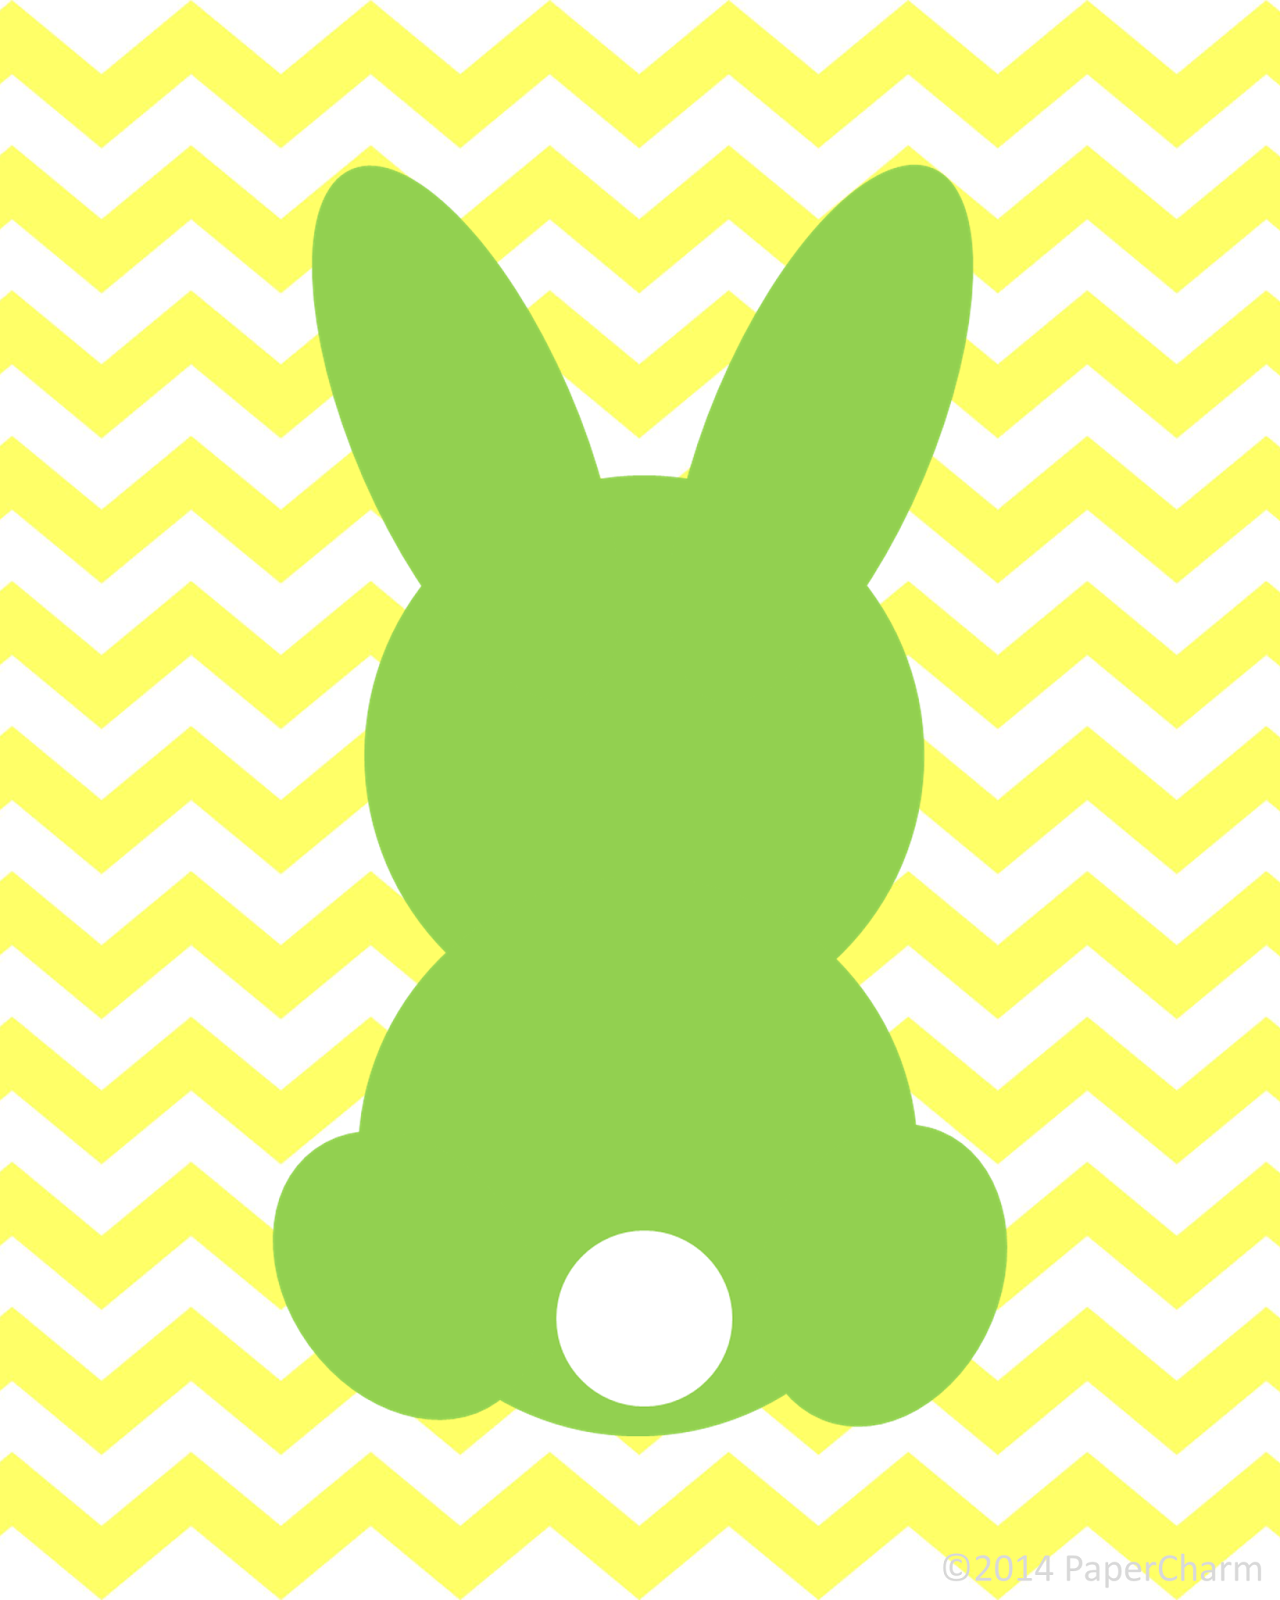 5-best-images-of-free-bunny-silhouette-printable-8-x-10-free-printable-easter-bunny-silhouette